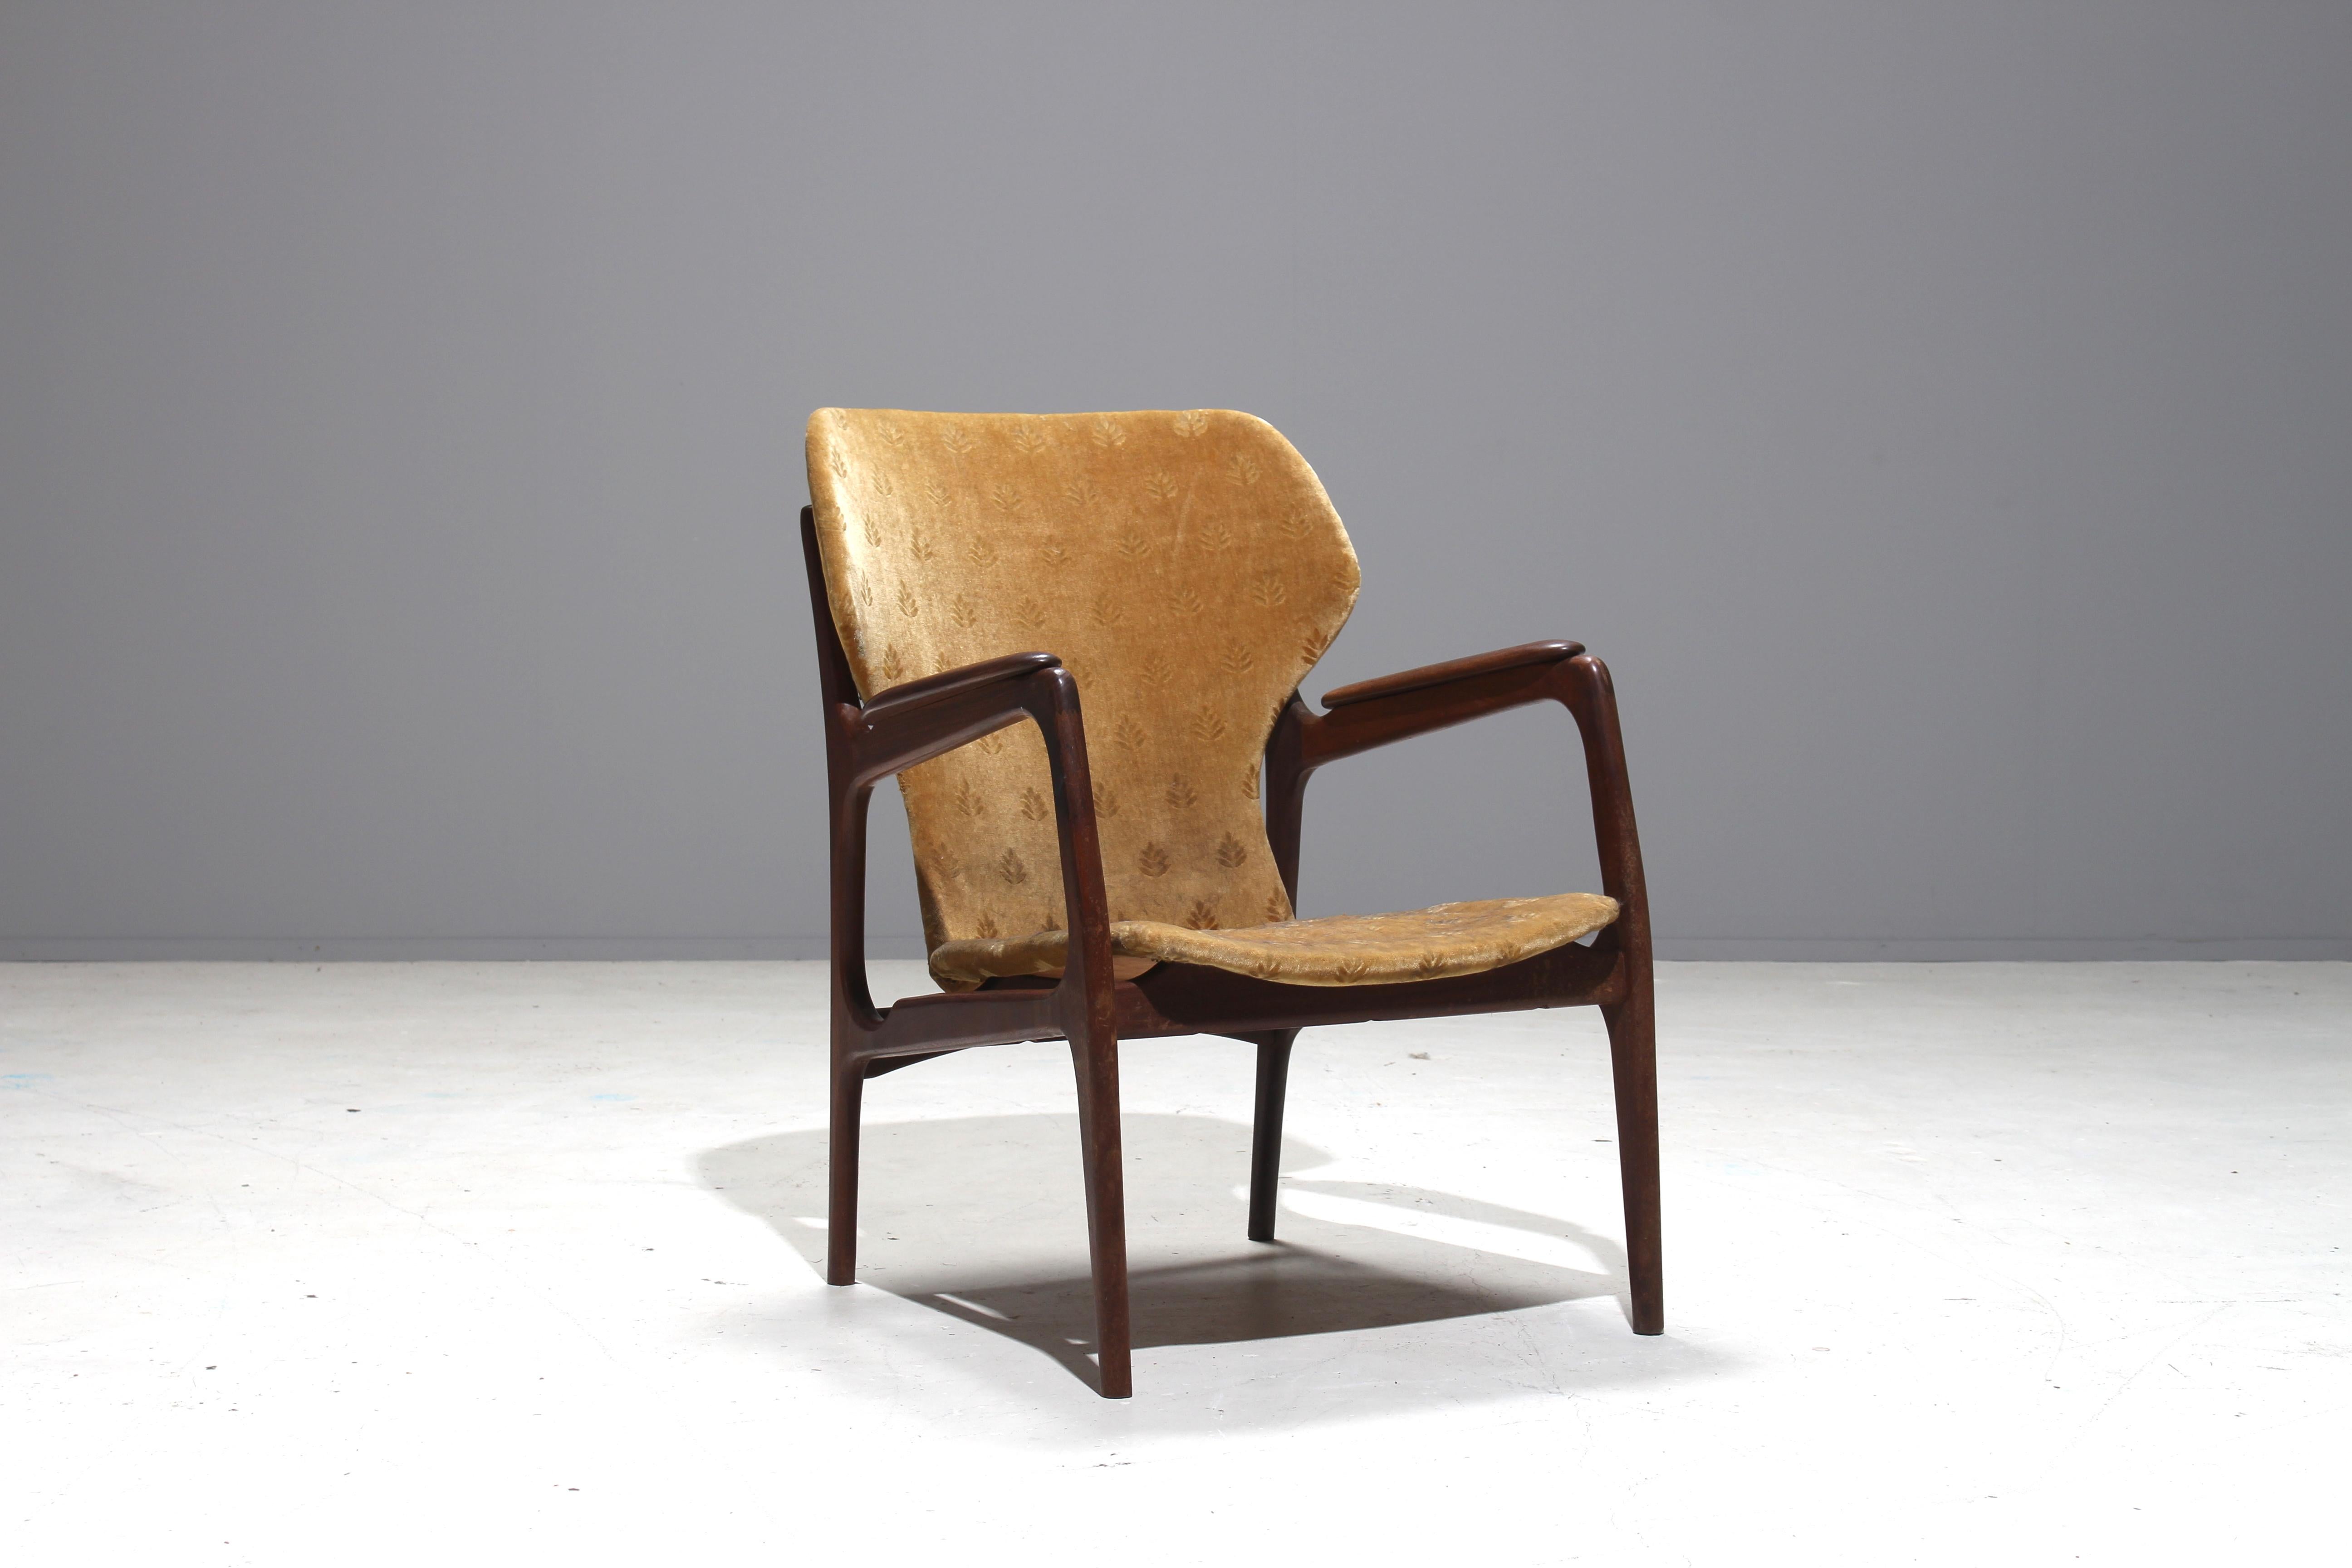 Beautiful shaped Danish wingback armchair which can be attributed to Aksel Bender Madsen.
This rare model has reminds also to the designs of Finn Juhl.
We have never seen this rare model before and it is a truly craftsman piece of art.
The